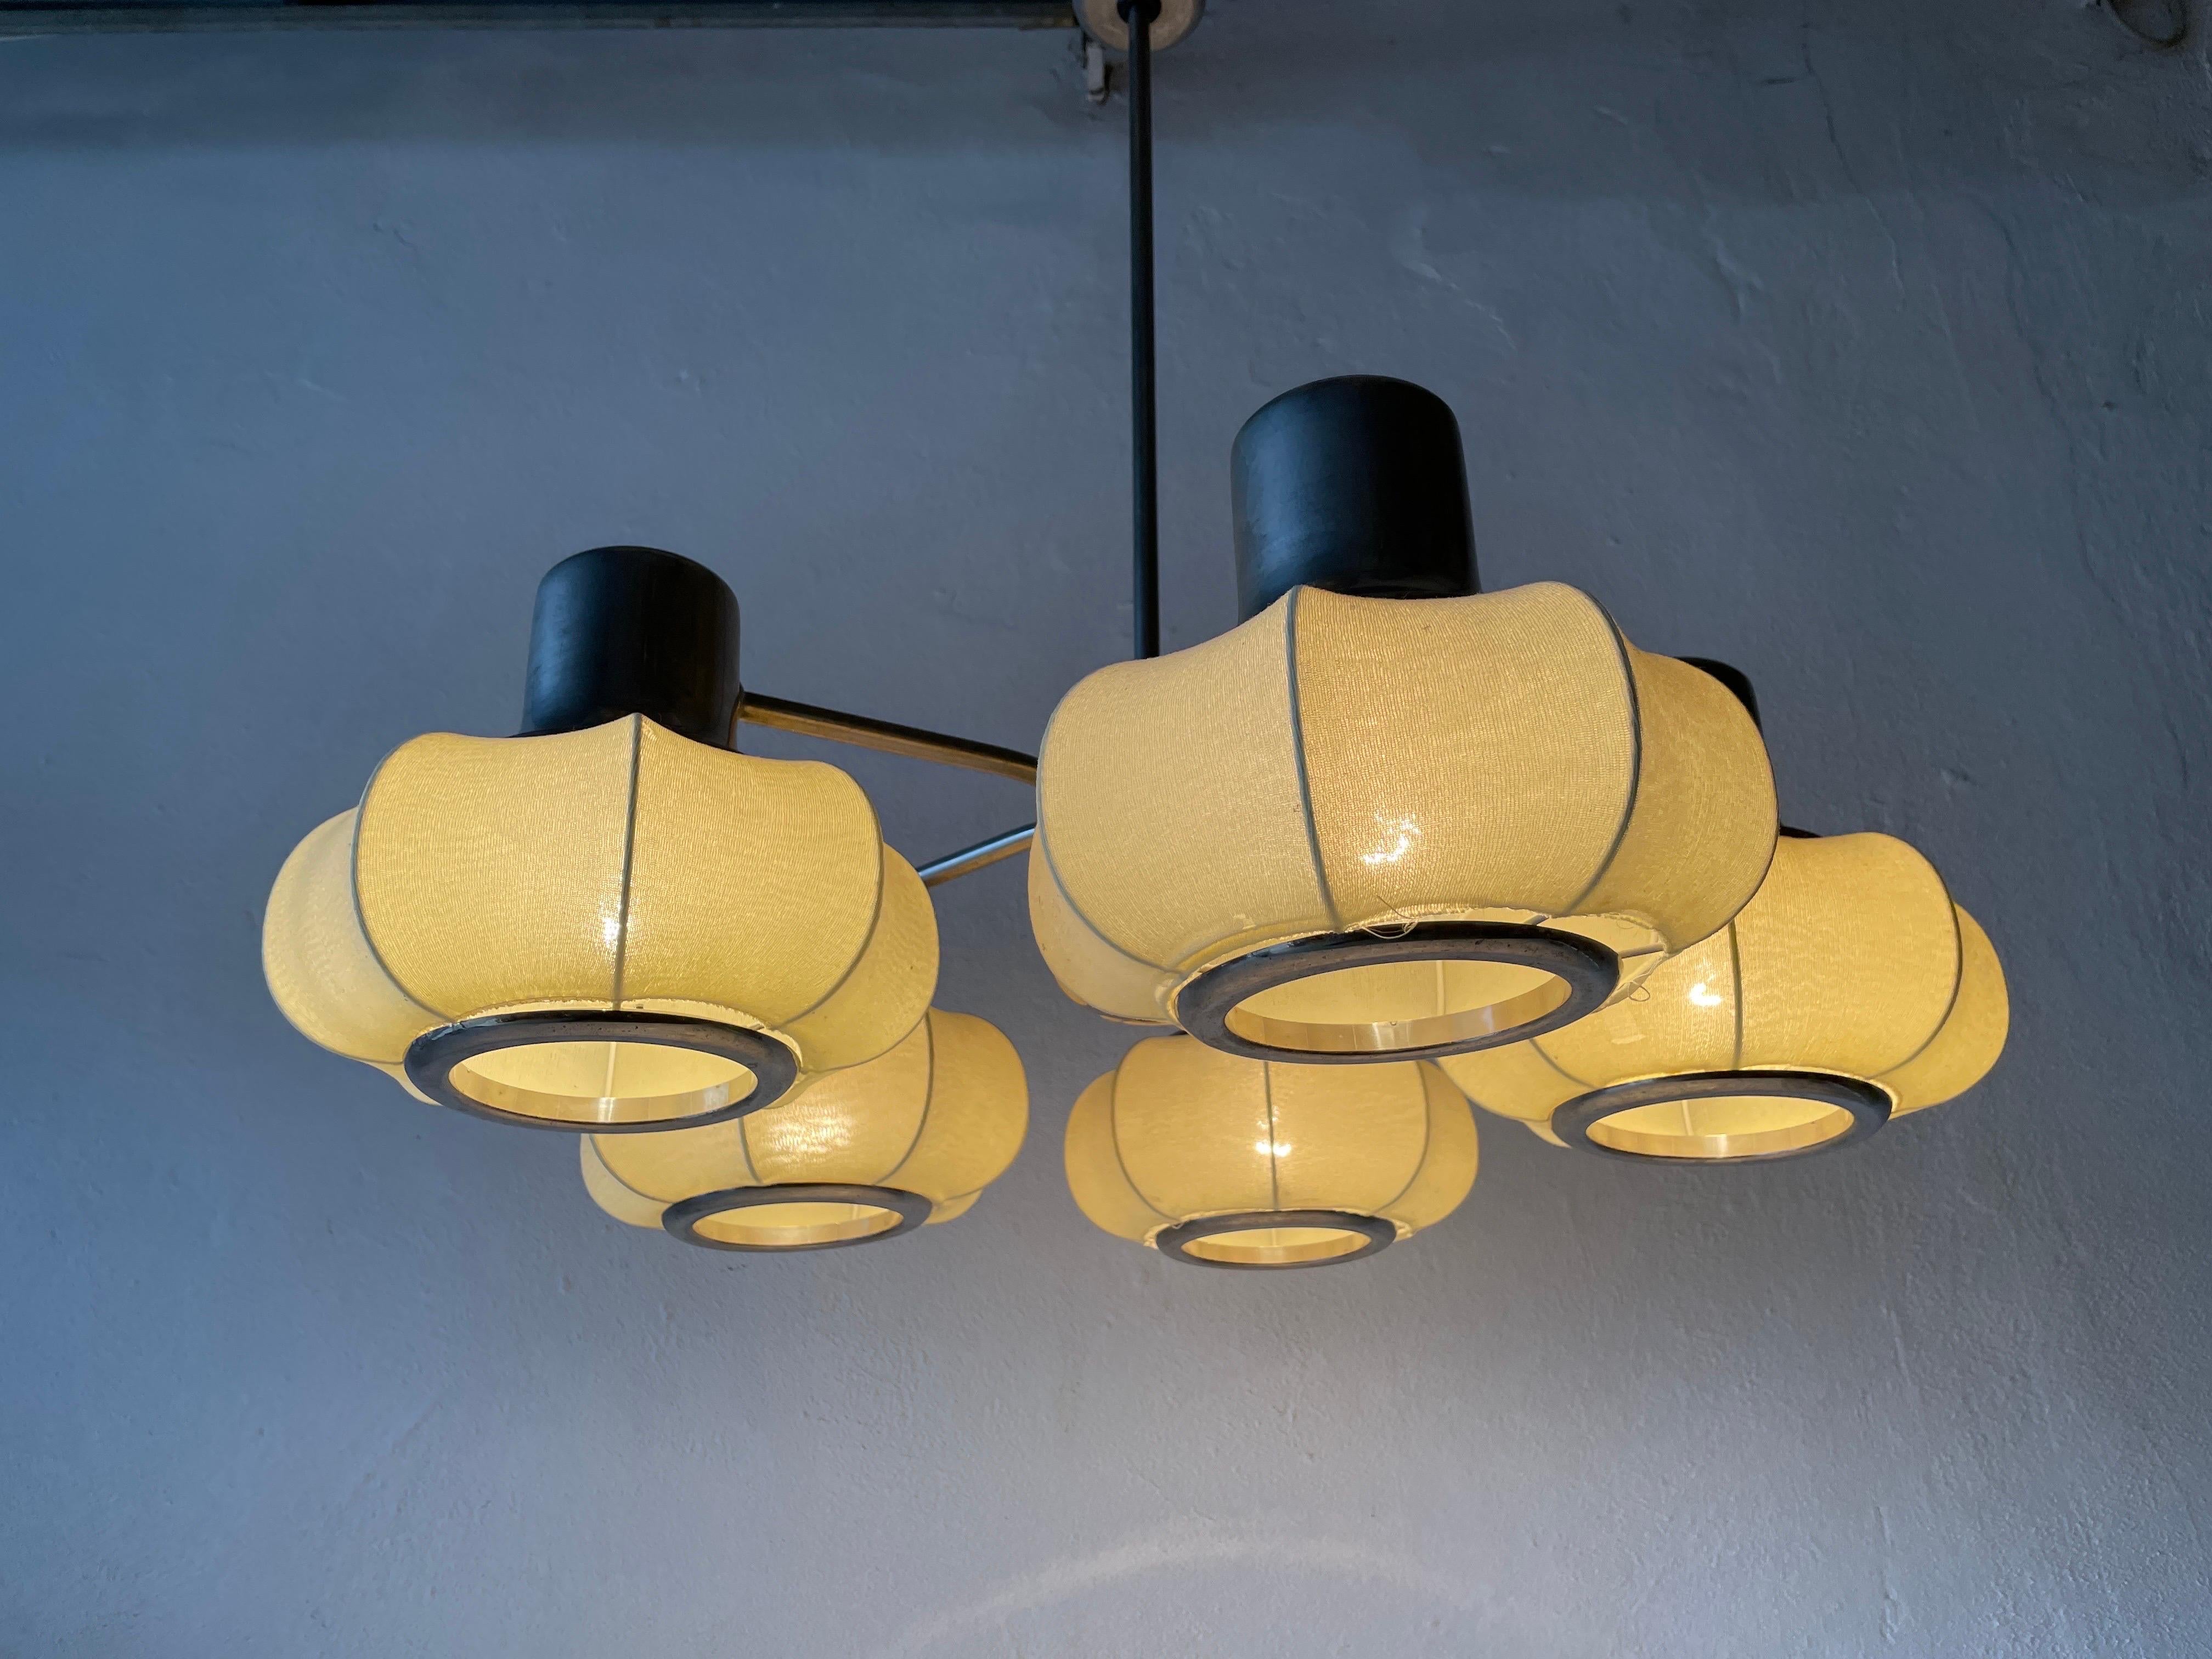 5-armed Metallic Chandelier with Fabric Shades by VEB Leuchten, 1950s, Germany For Sale 4